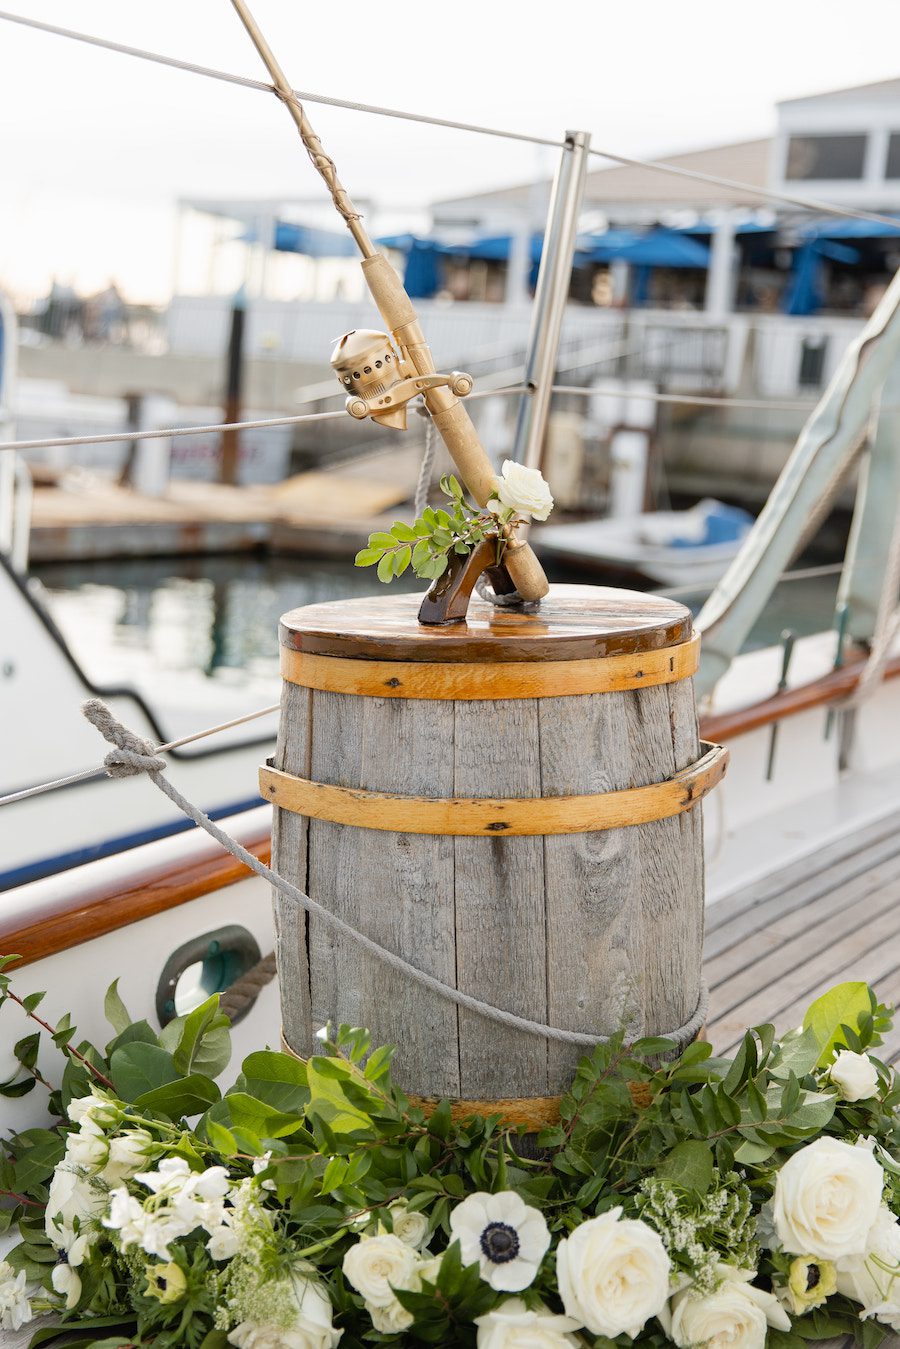 The gorgeous golden fish pole was adorned with florals on the sailboat